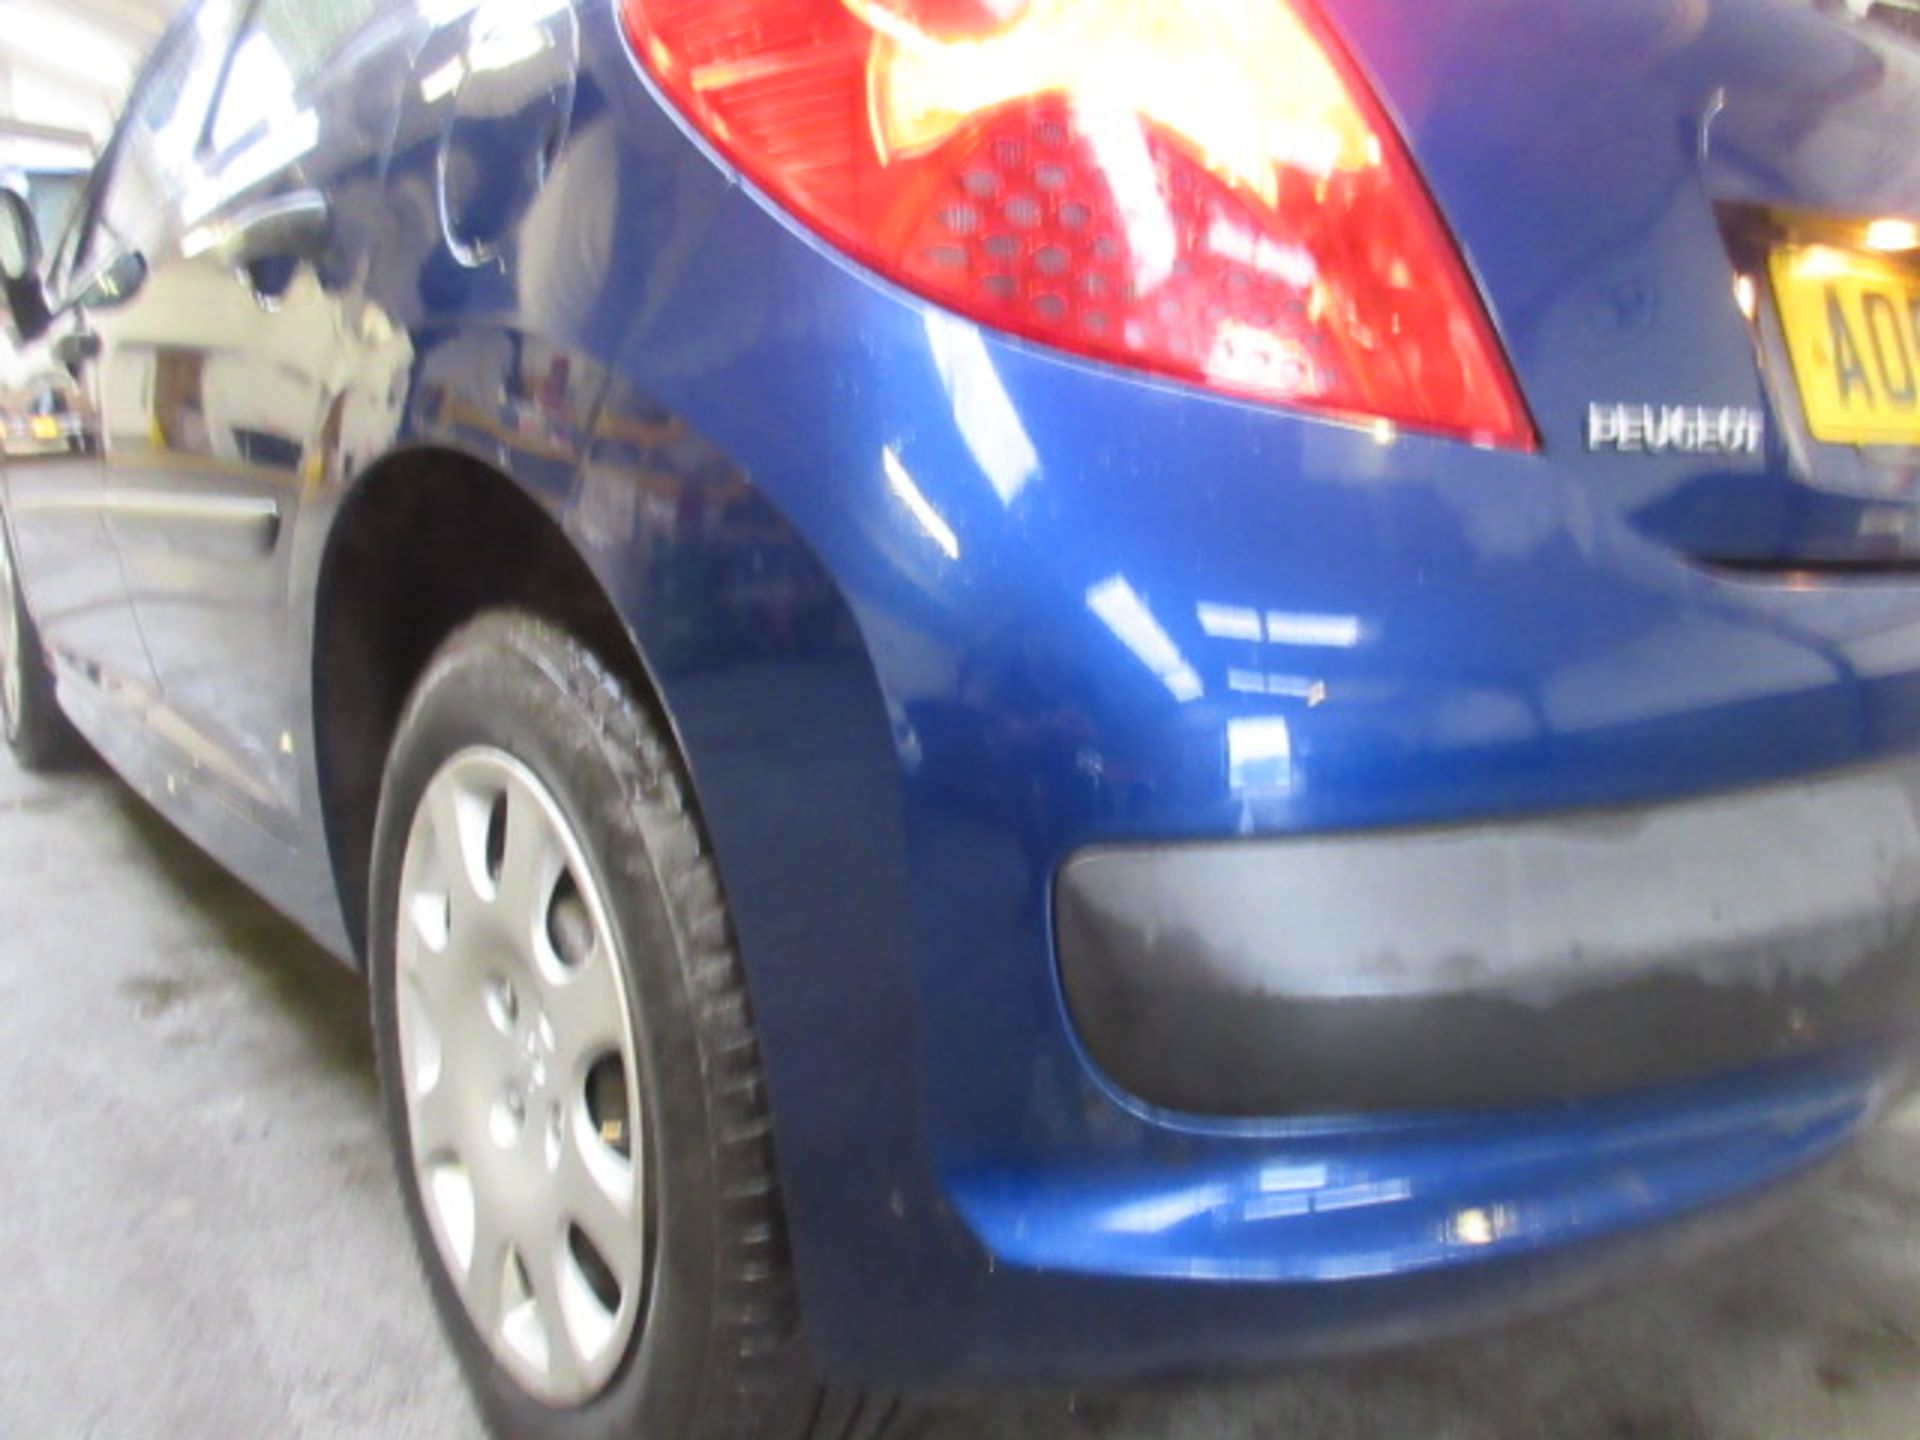 59 09 Peugeot 207 XE - Image 2 of 16